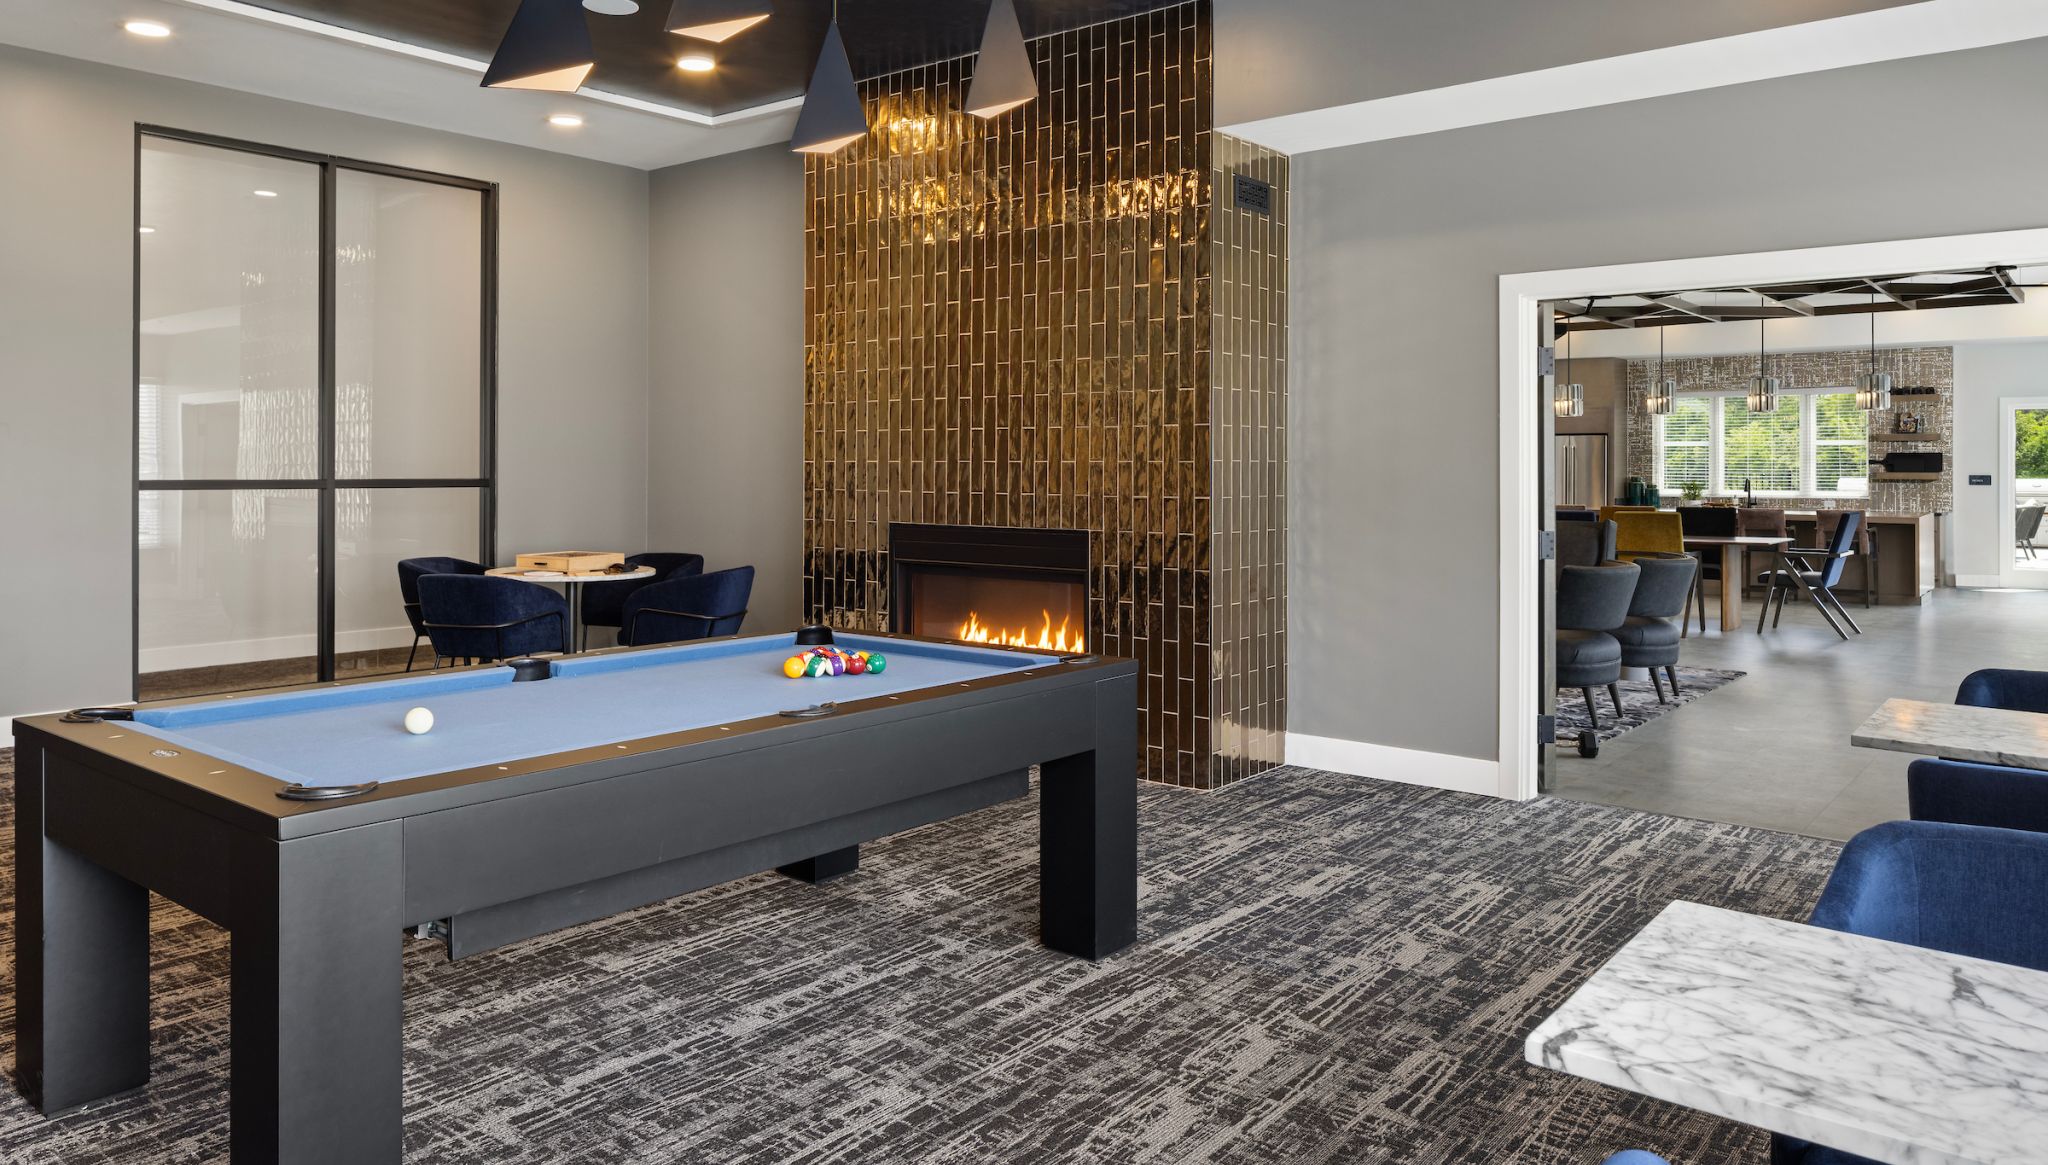 Slate apartments clubhouse game room with billiards table and seating.